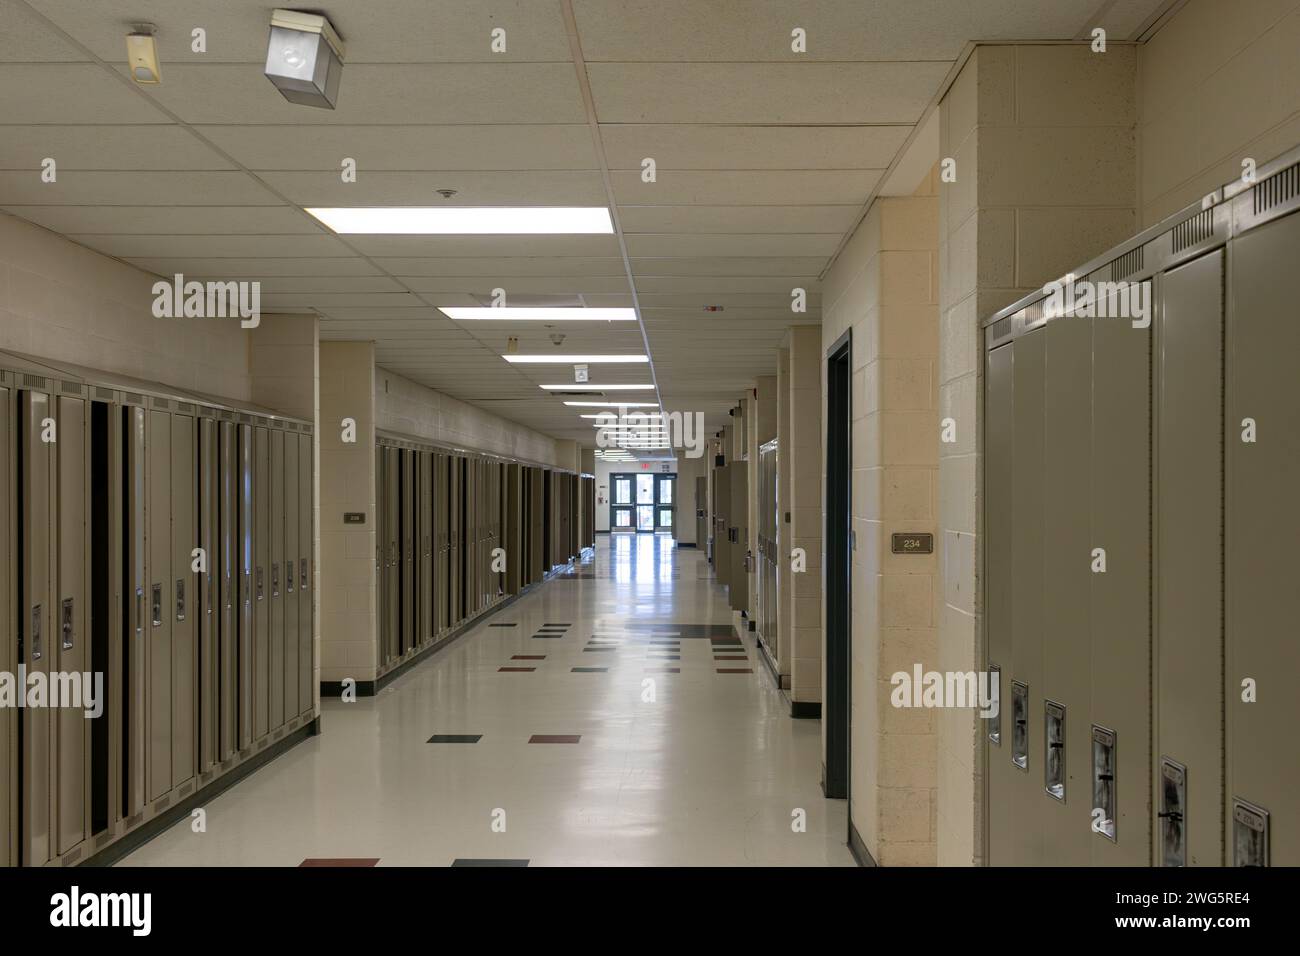 Empty school hallway - lined with closed lockers - beige walls - tiled floor - ceiling lights illuminating space - exit doors at the end. Taken in Tor Stock Photo